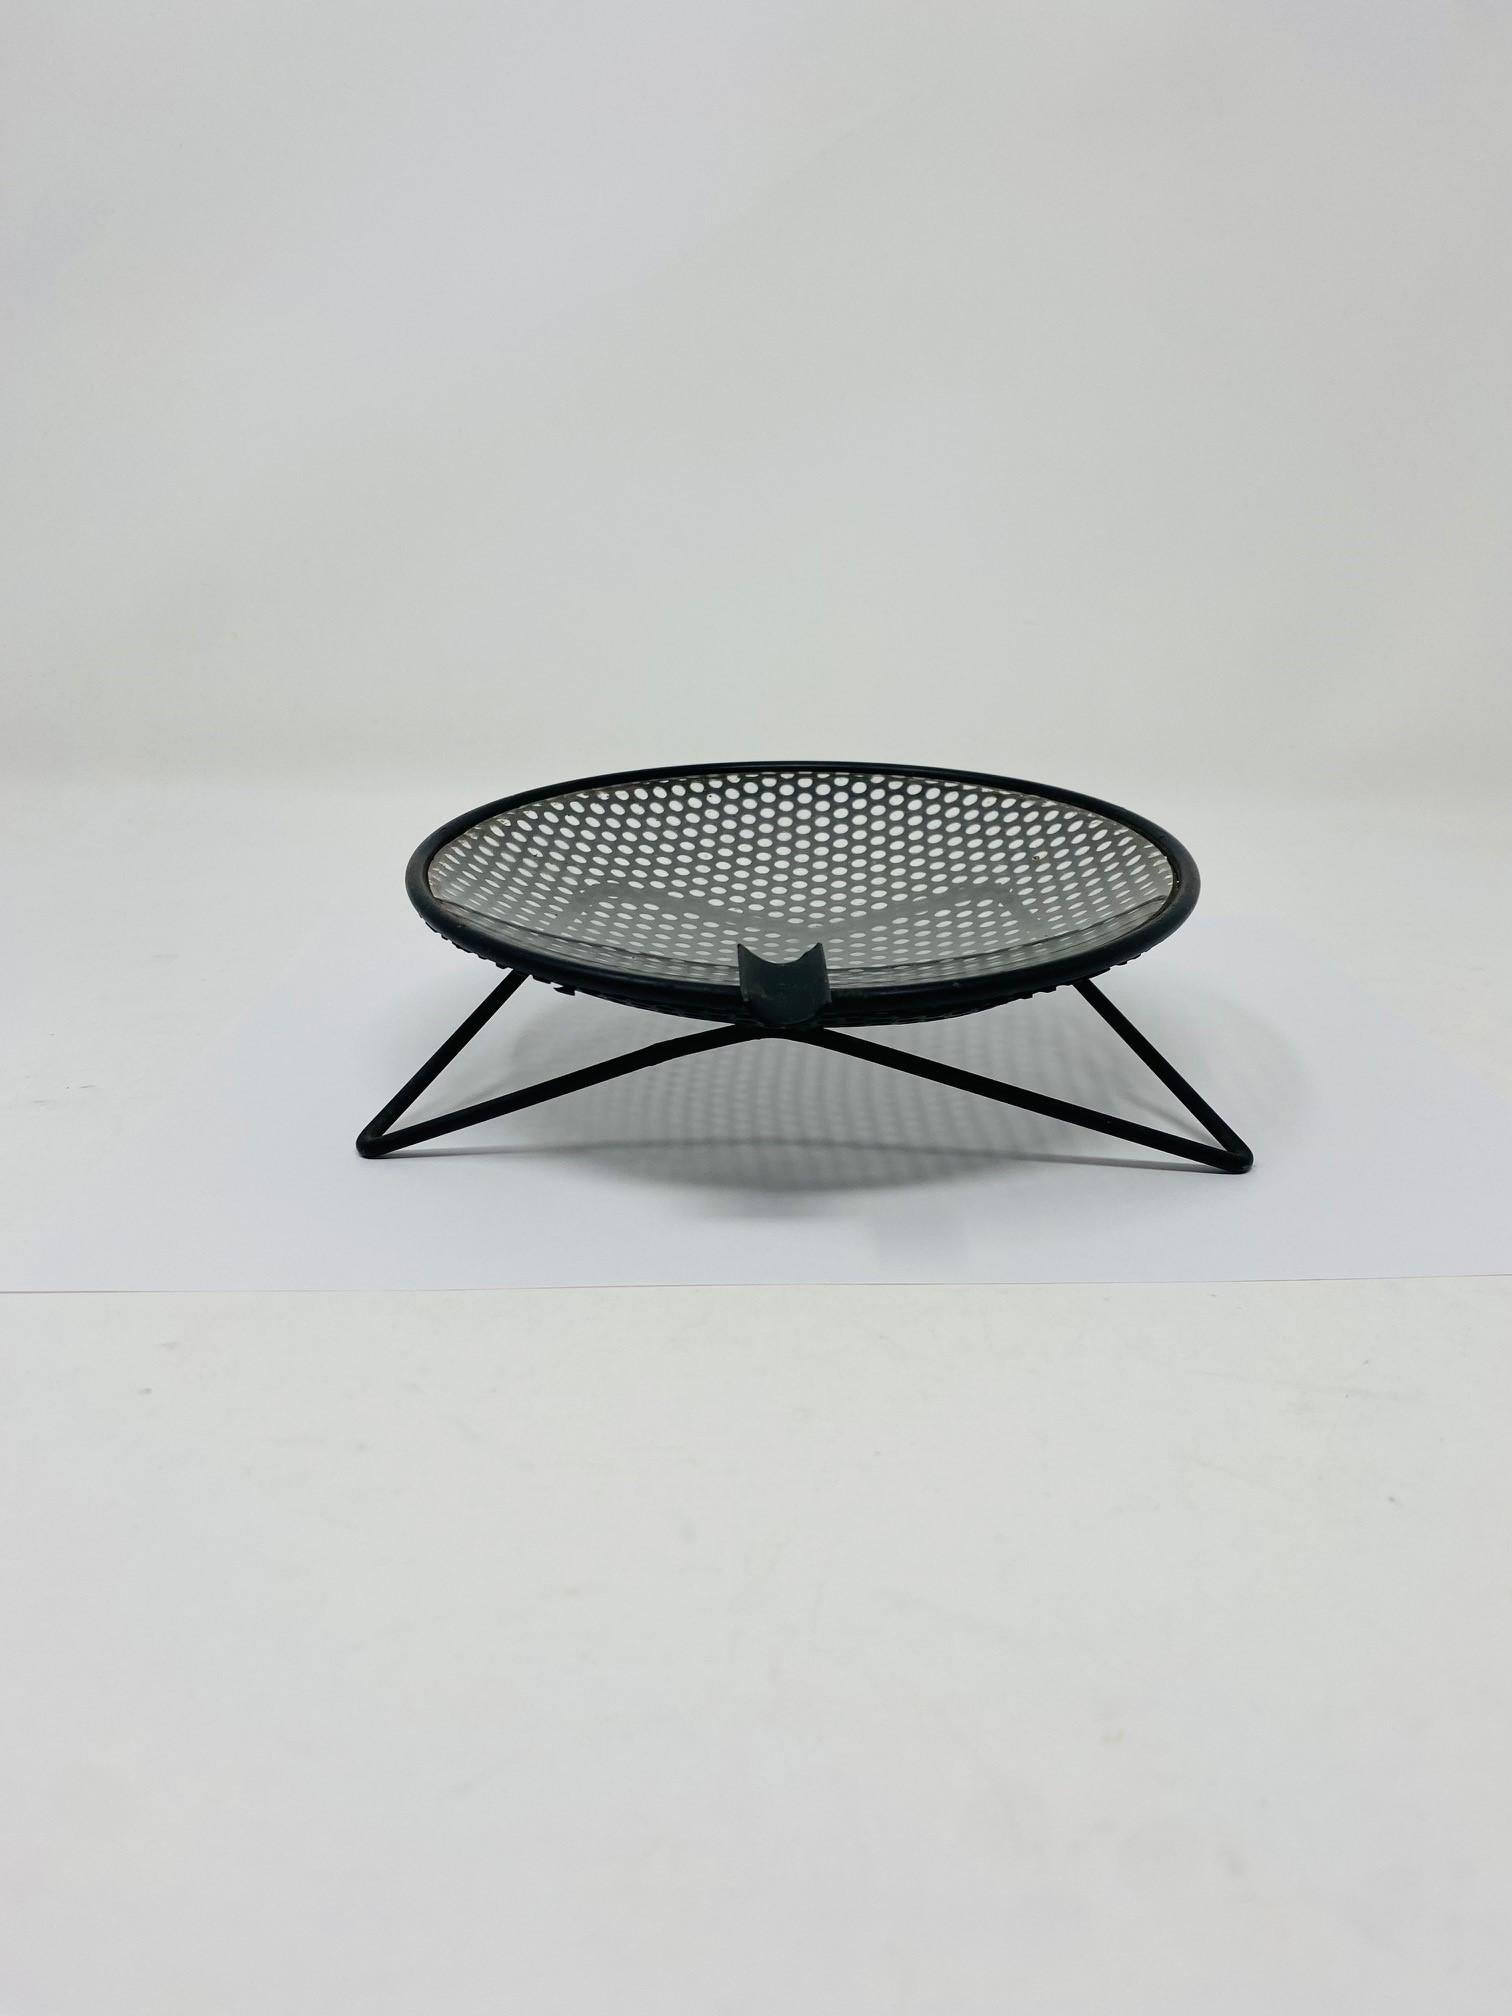 1950s Perforated Metal Mesh Atomic Dish Ashtray Nº S30  Richard Galef Ravenware In Good Condition For Sale In San Diego, CA